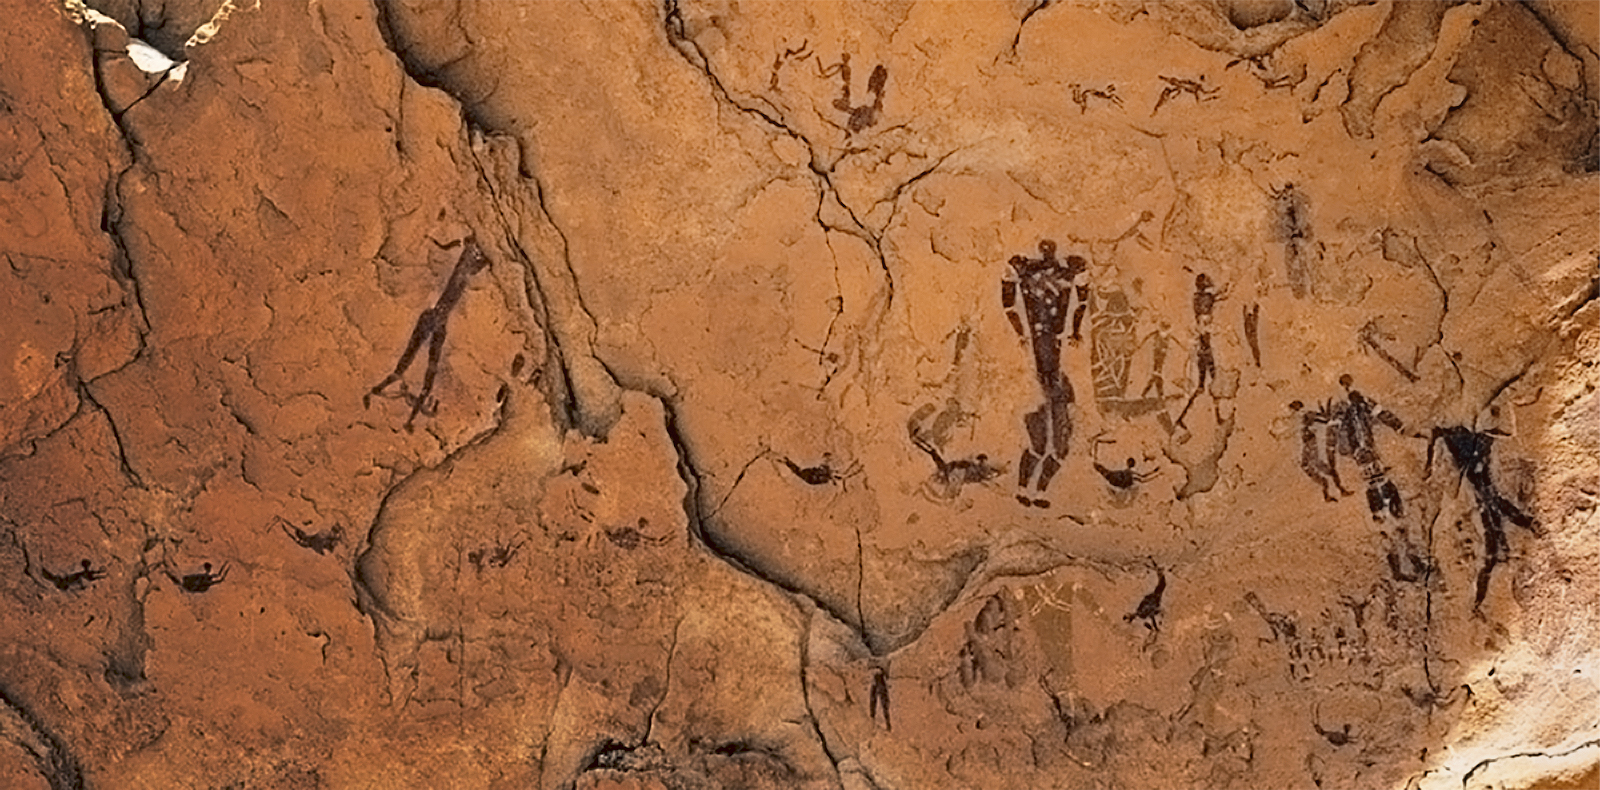 Rock art in the Cave of Swimmers, showing art in the Wadi Sura style from between about 6100-4800 BCEBradshaw Foundation